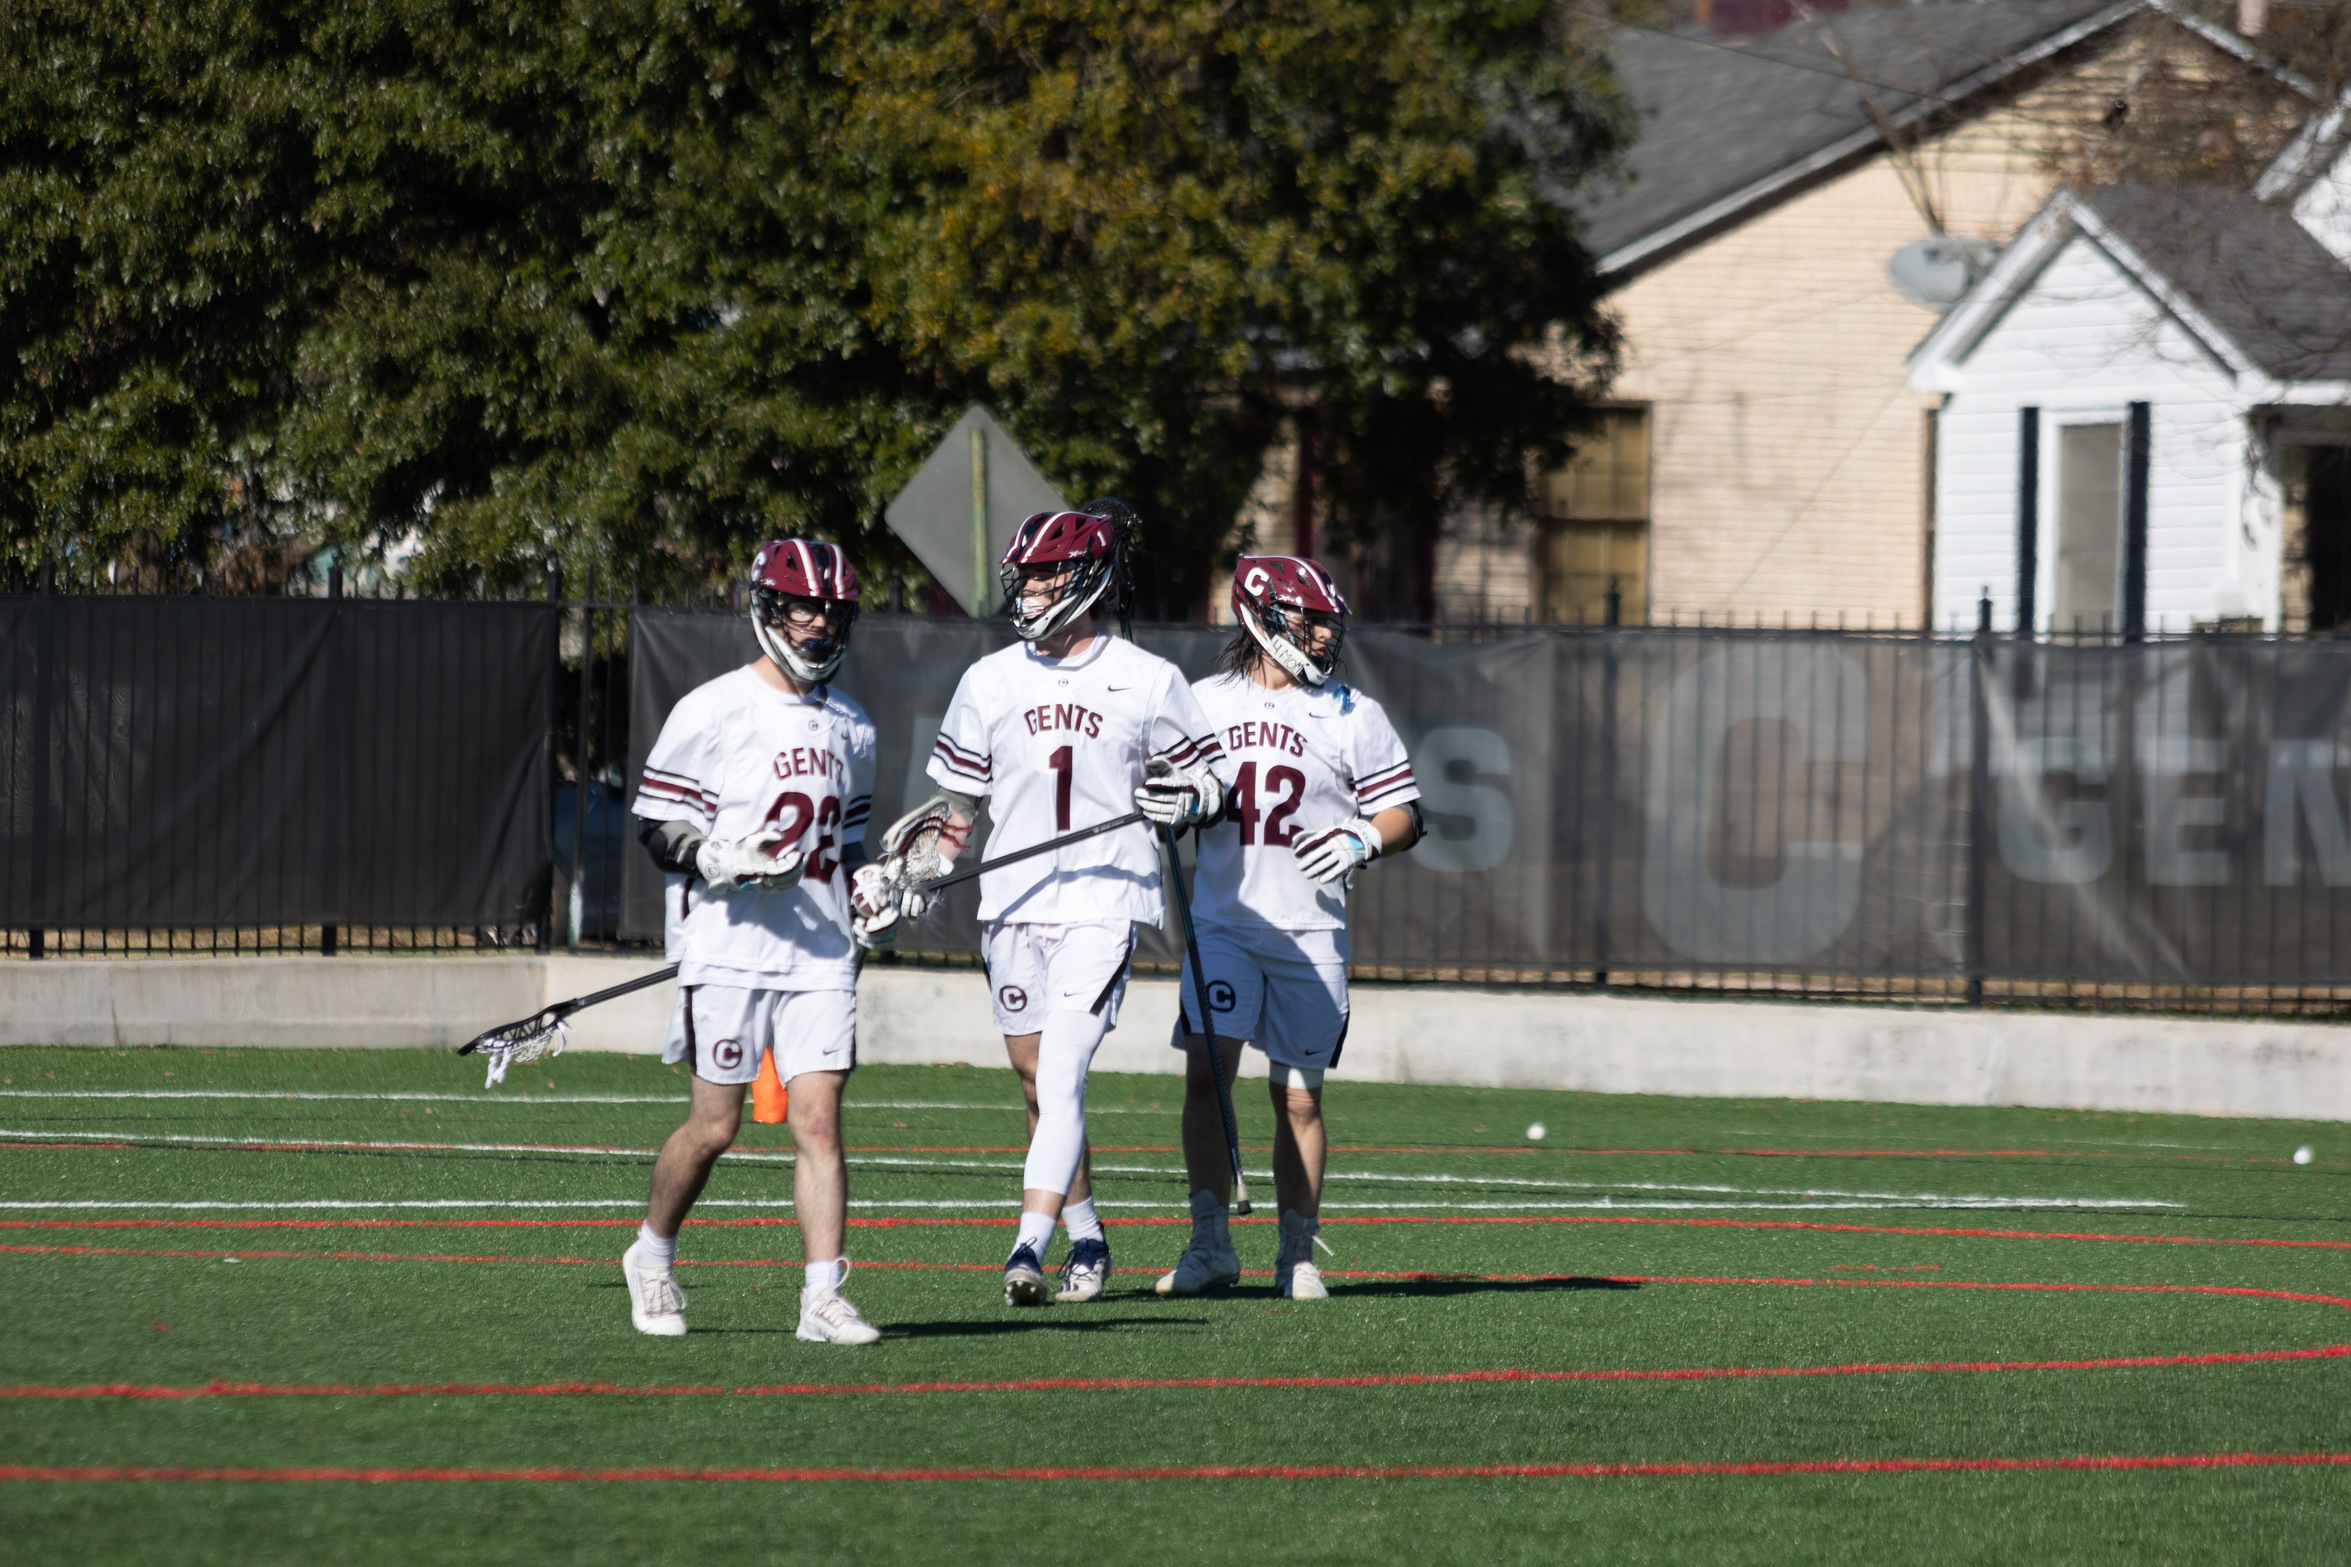 Gents Fall 27-11 To Kalamazoo College On Tuesday